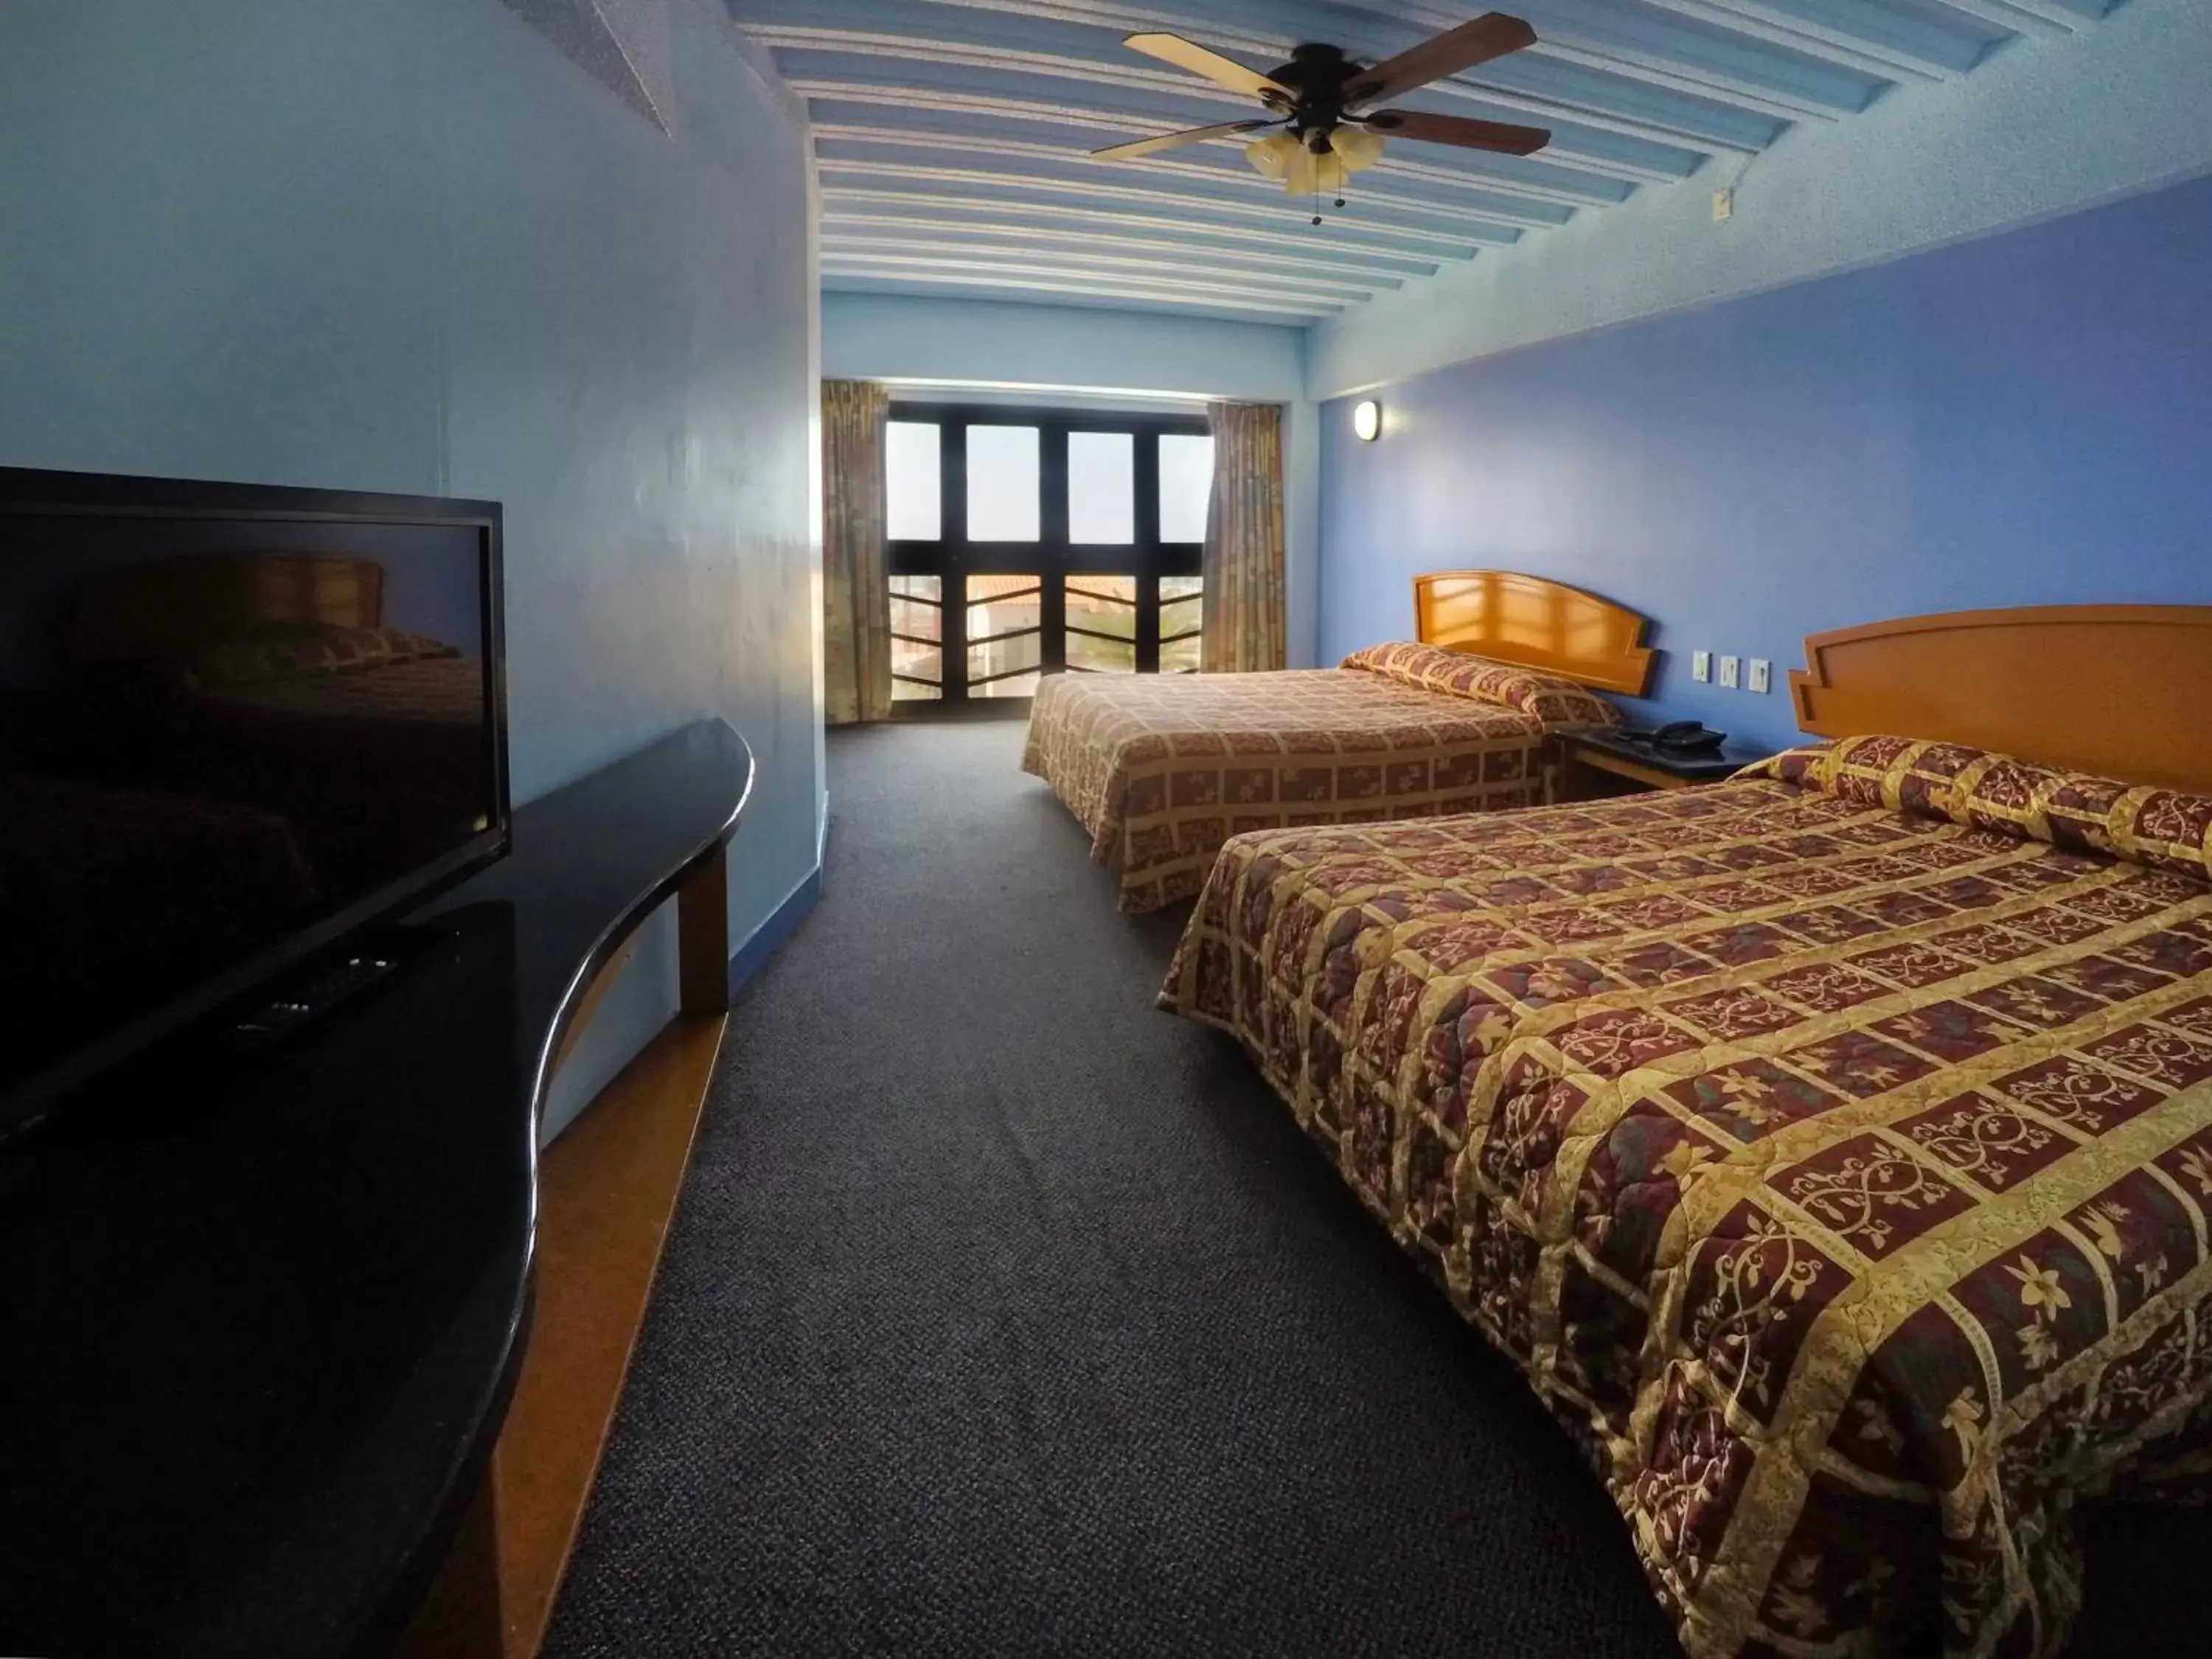  Double Room without view   in Hotel Festival Plaza Playas Rosarito